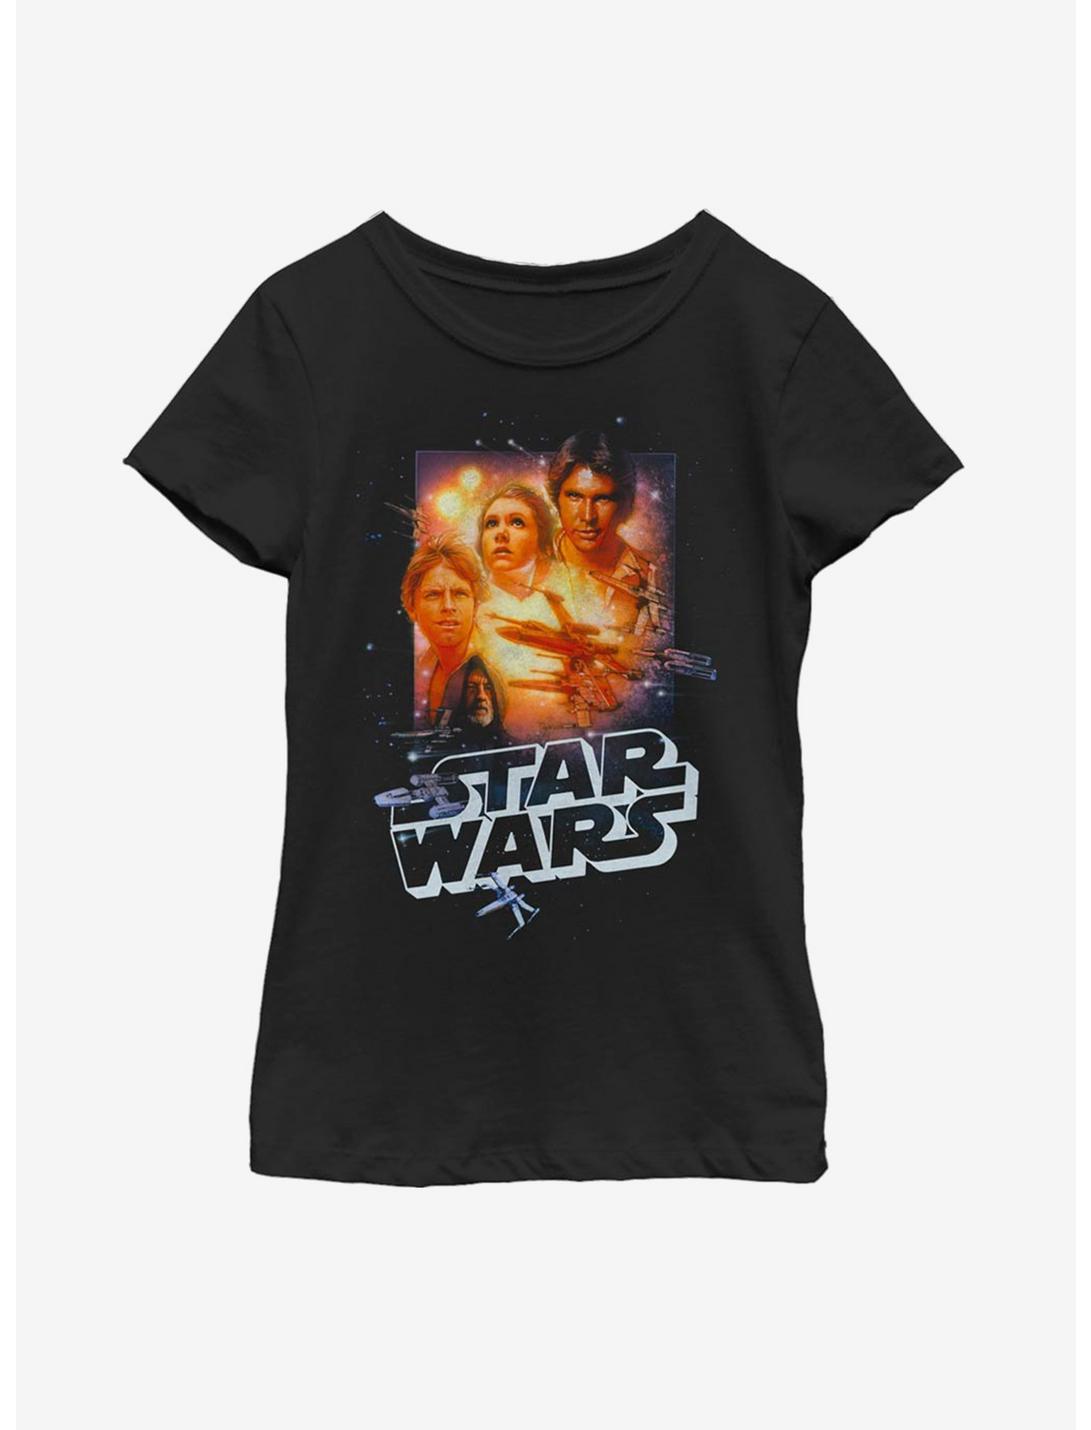 Star Wars Our Heroes Youth Girls T-Shirt, BLACK, hi-res